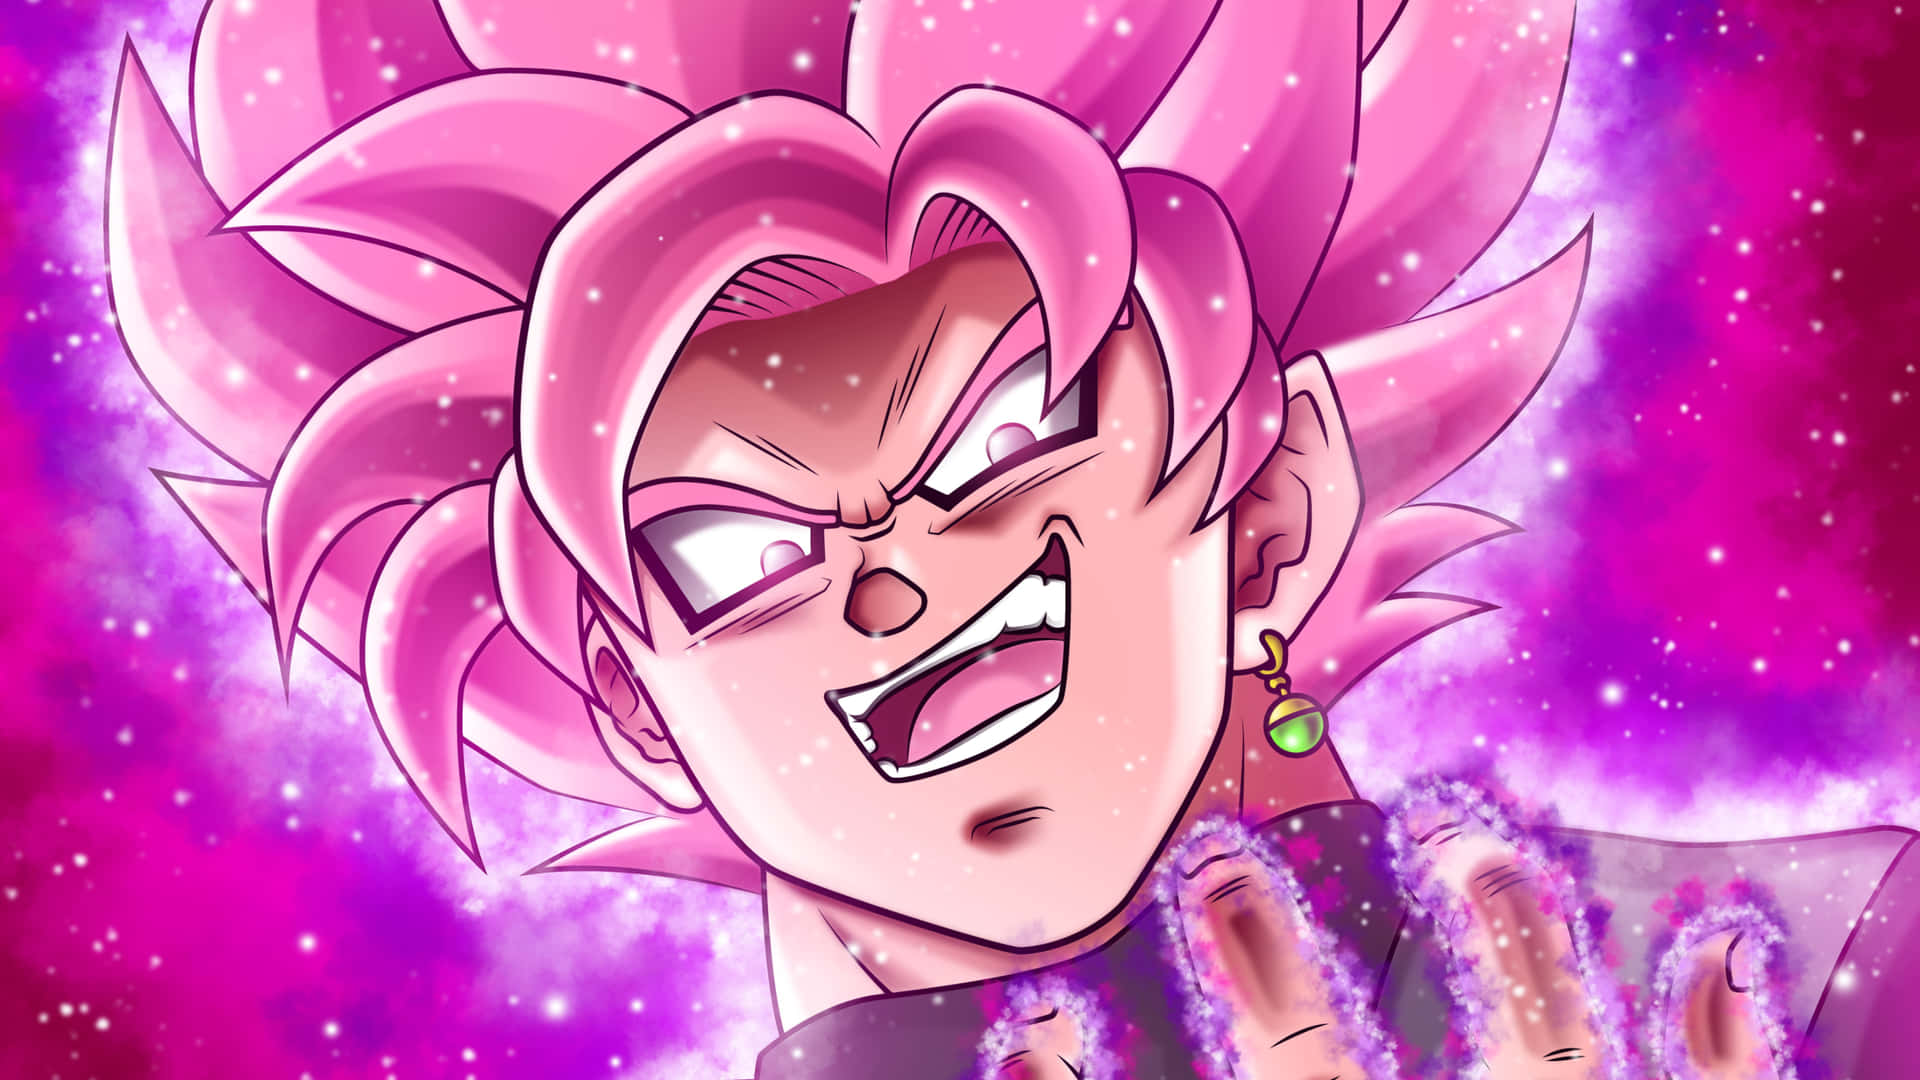 Get Ready to Unleash Ultimate Power with Goku Black in 4K Quality Wallpaper